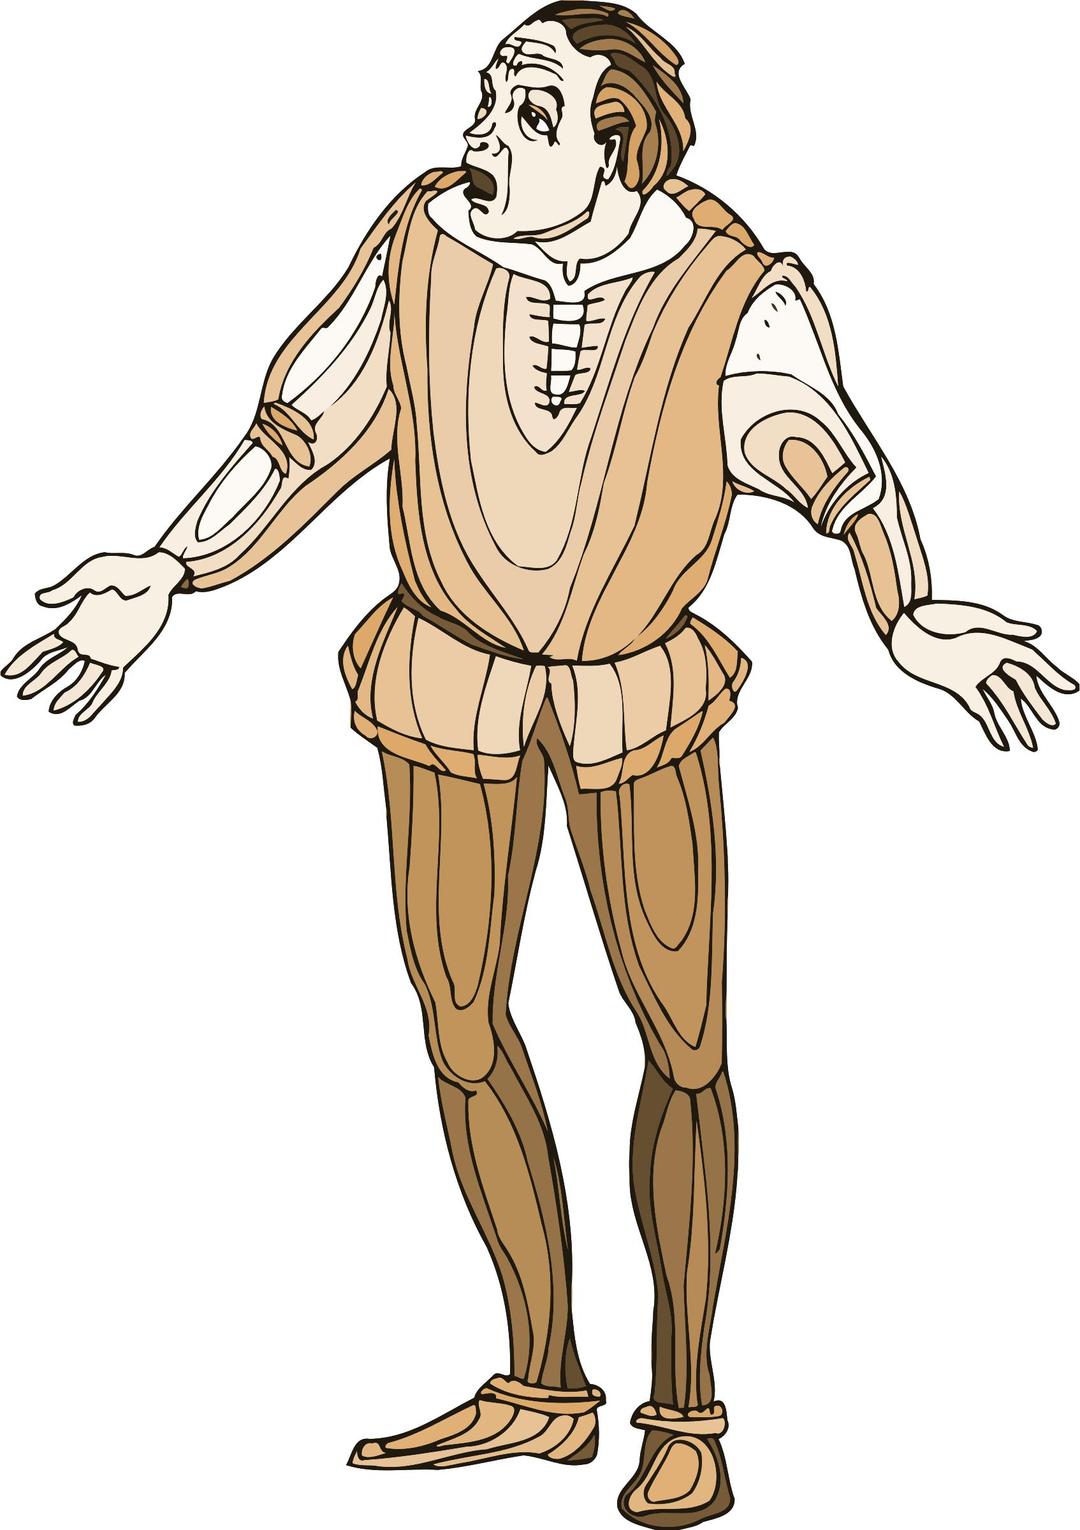 Shakespeare characters - Balthazar png transparent